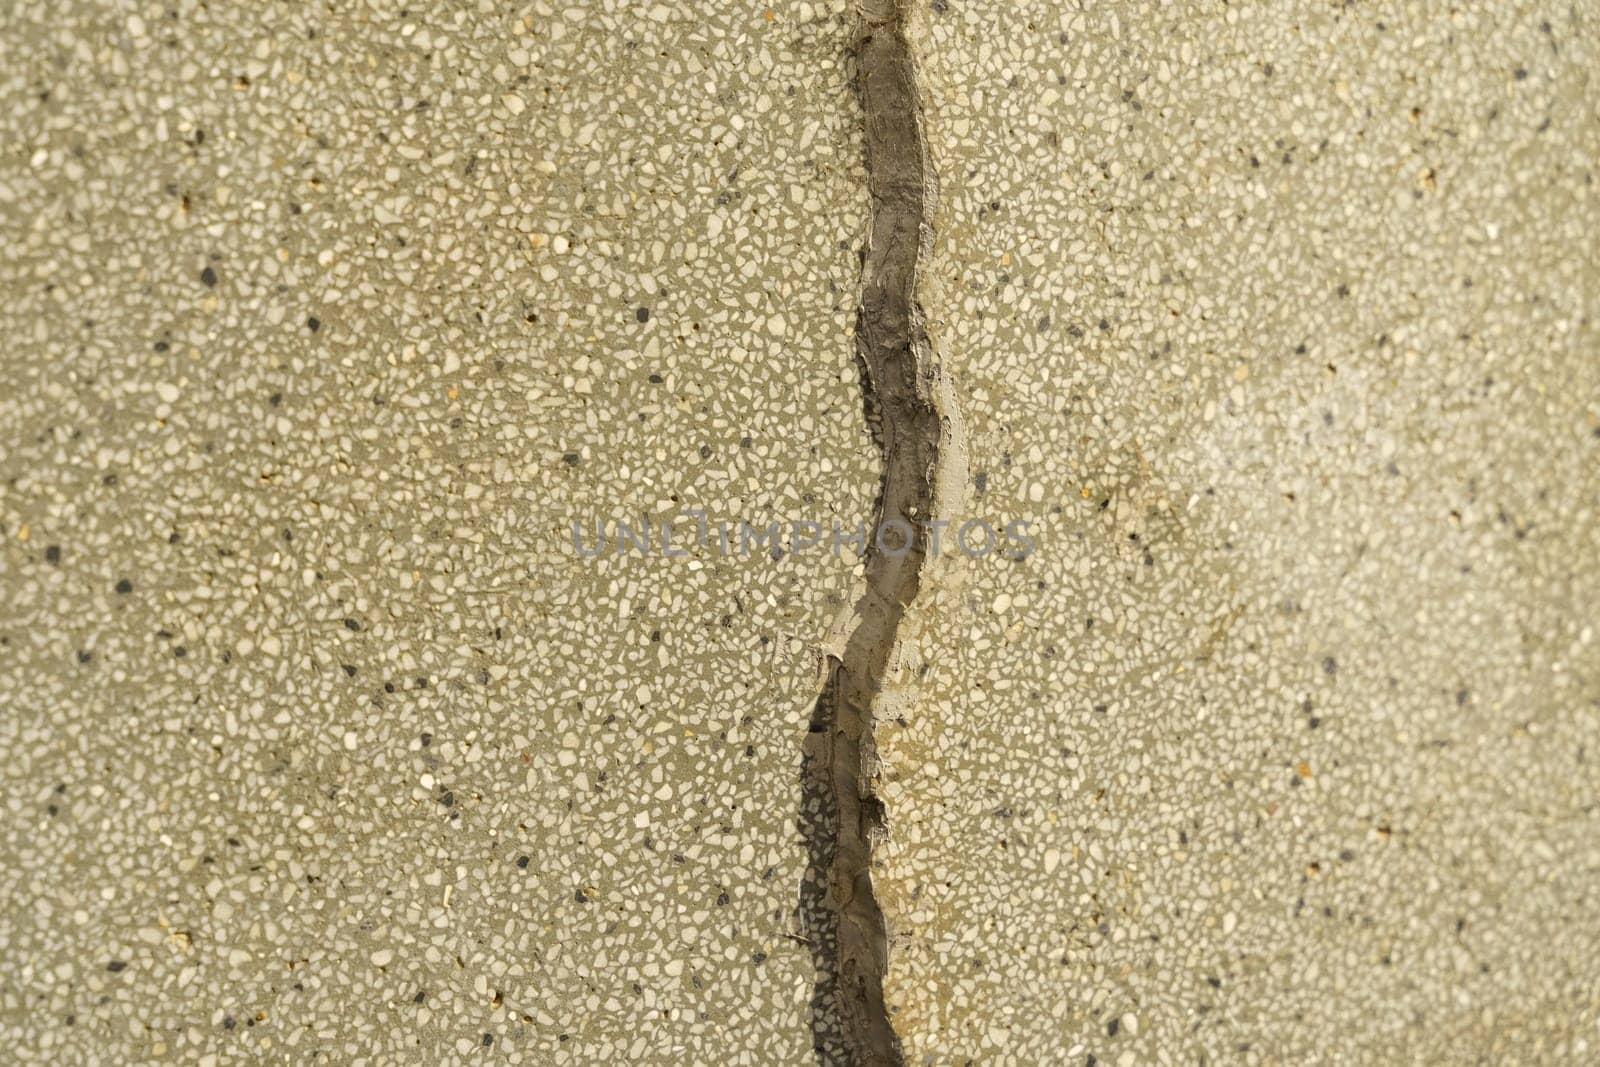 A close-up view of a cracked concrete wall, showcasing the texture and abstraction of the stone surface.